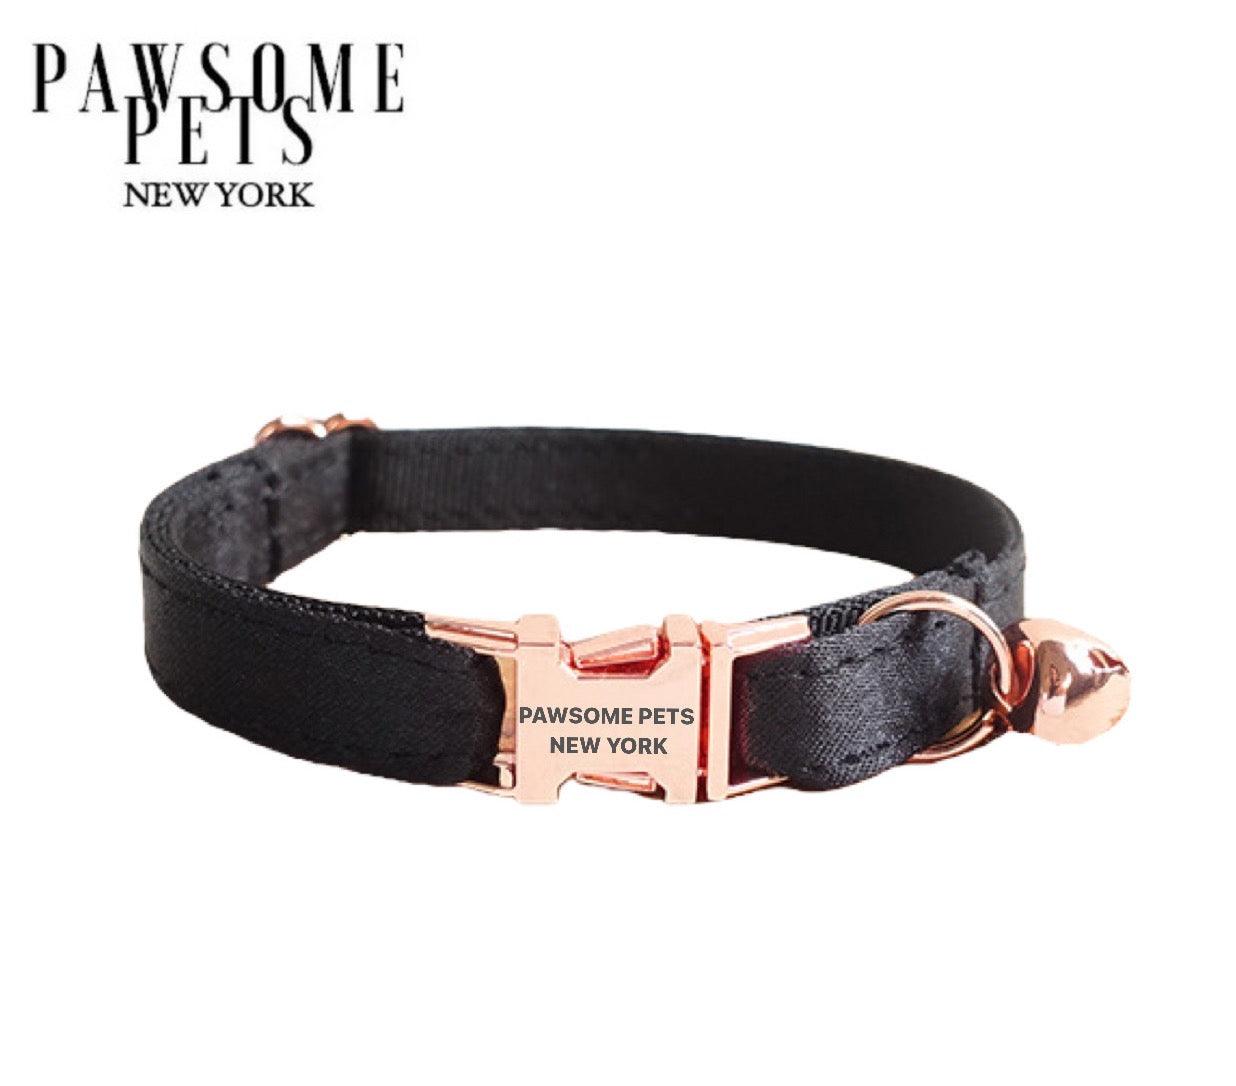 Pawsome Pets New York  Dog and cat collars Fully Adjustable Collar Made out of nylon webbing with quick use buckle  Spot clean with soap and water. Hang to dry.